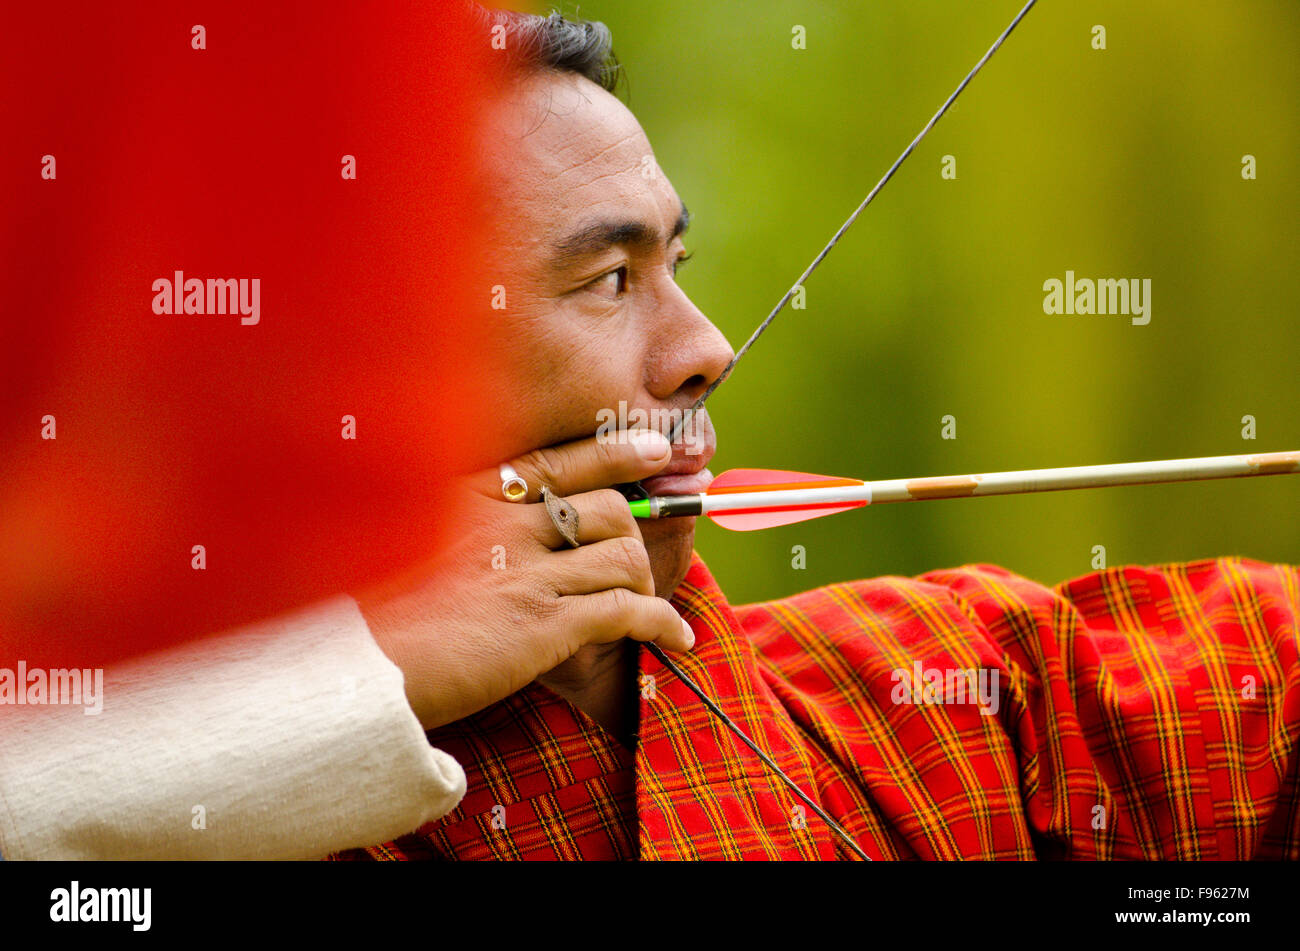 A Buddhist man takes aim with a bow and arrow in Bhutan, where the national sport is archery Stock Photo